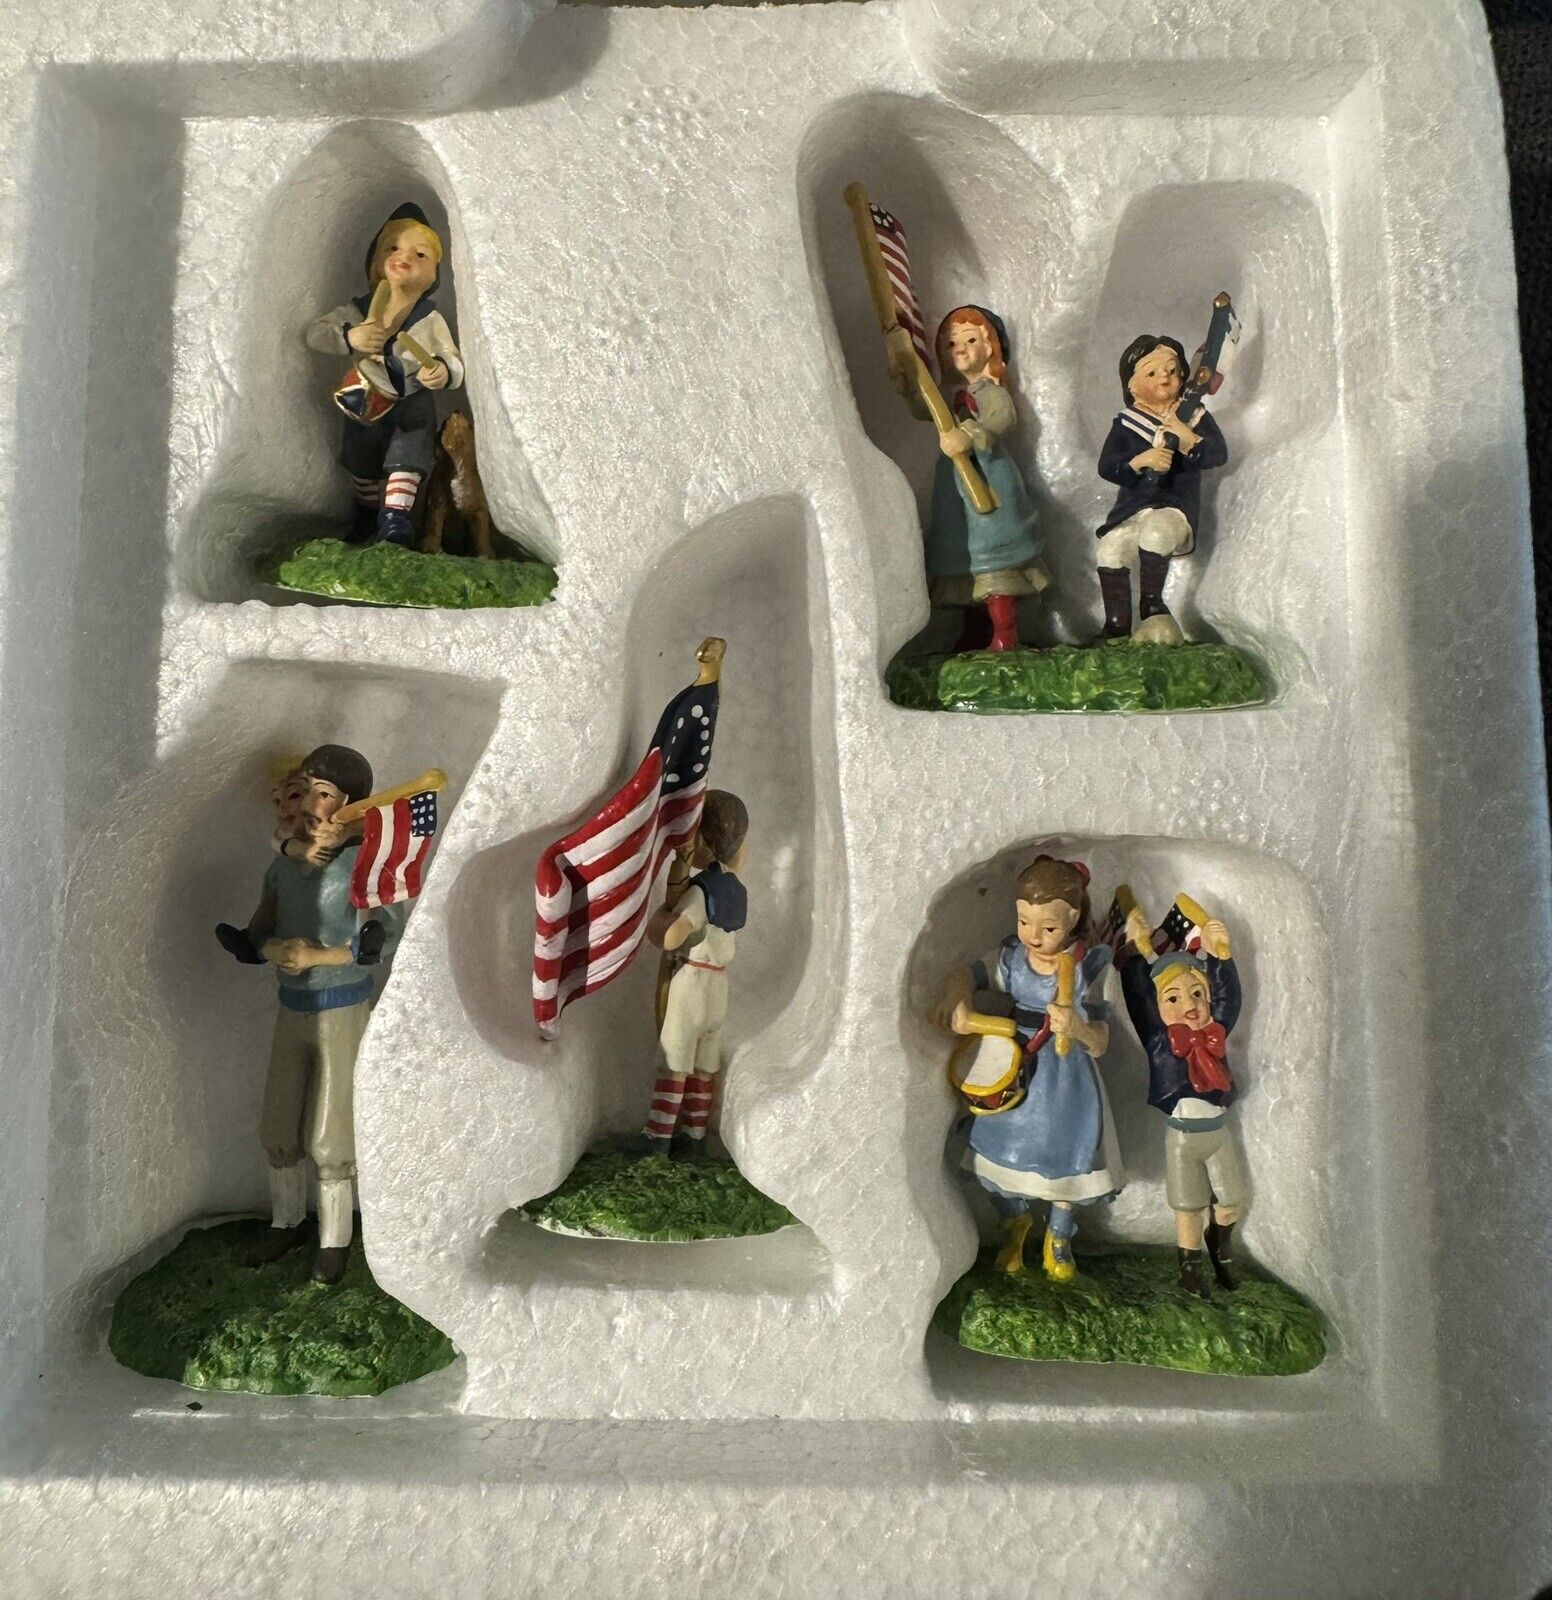 Dept 56 Seasons Bay Accessory 4TH Of July Parade Set of 5 Small Figures